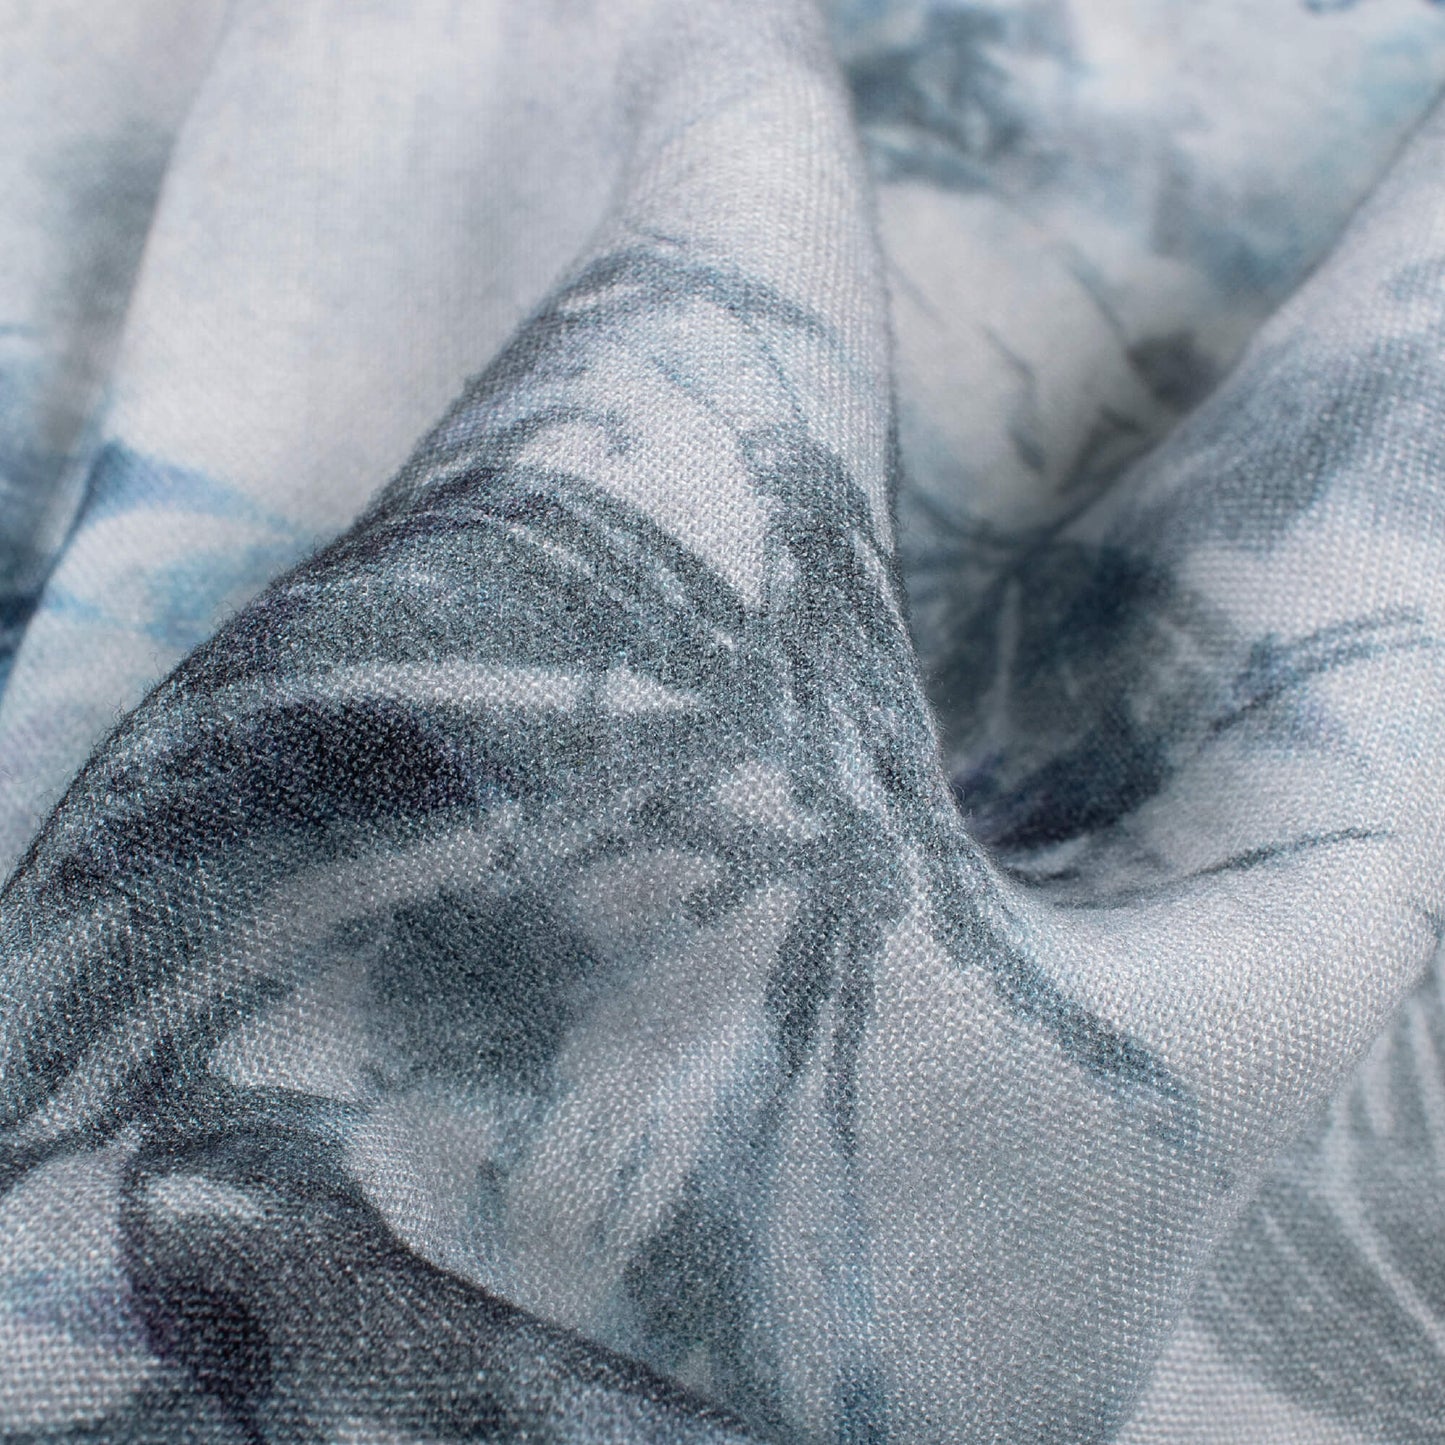 Anchor Grey And White Butterfly Pattern Digital Print Viscose Rayon Fabric (Width 58 Inches)